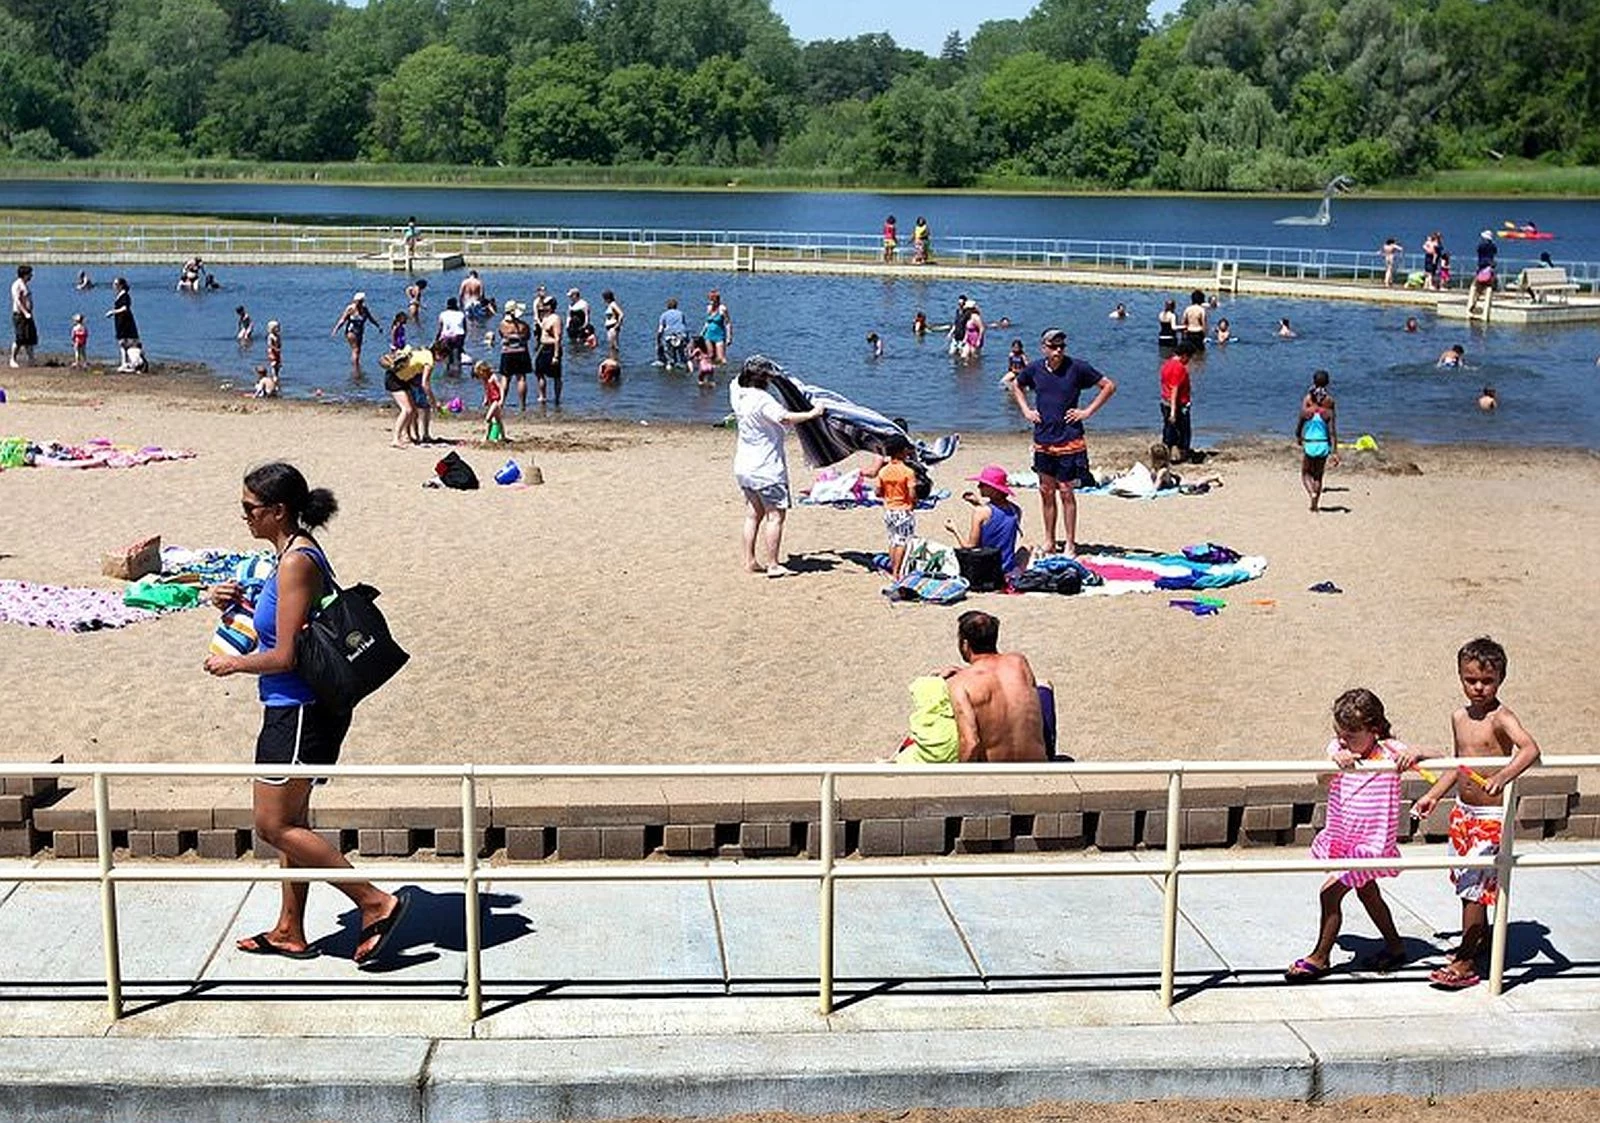 Minneapolis Closes Beaches, Pools for Entire Summer